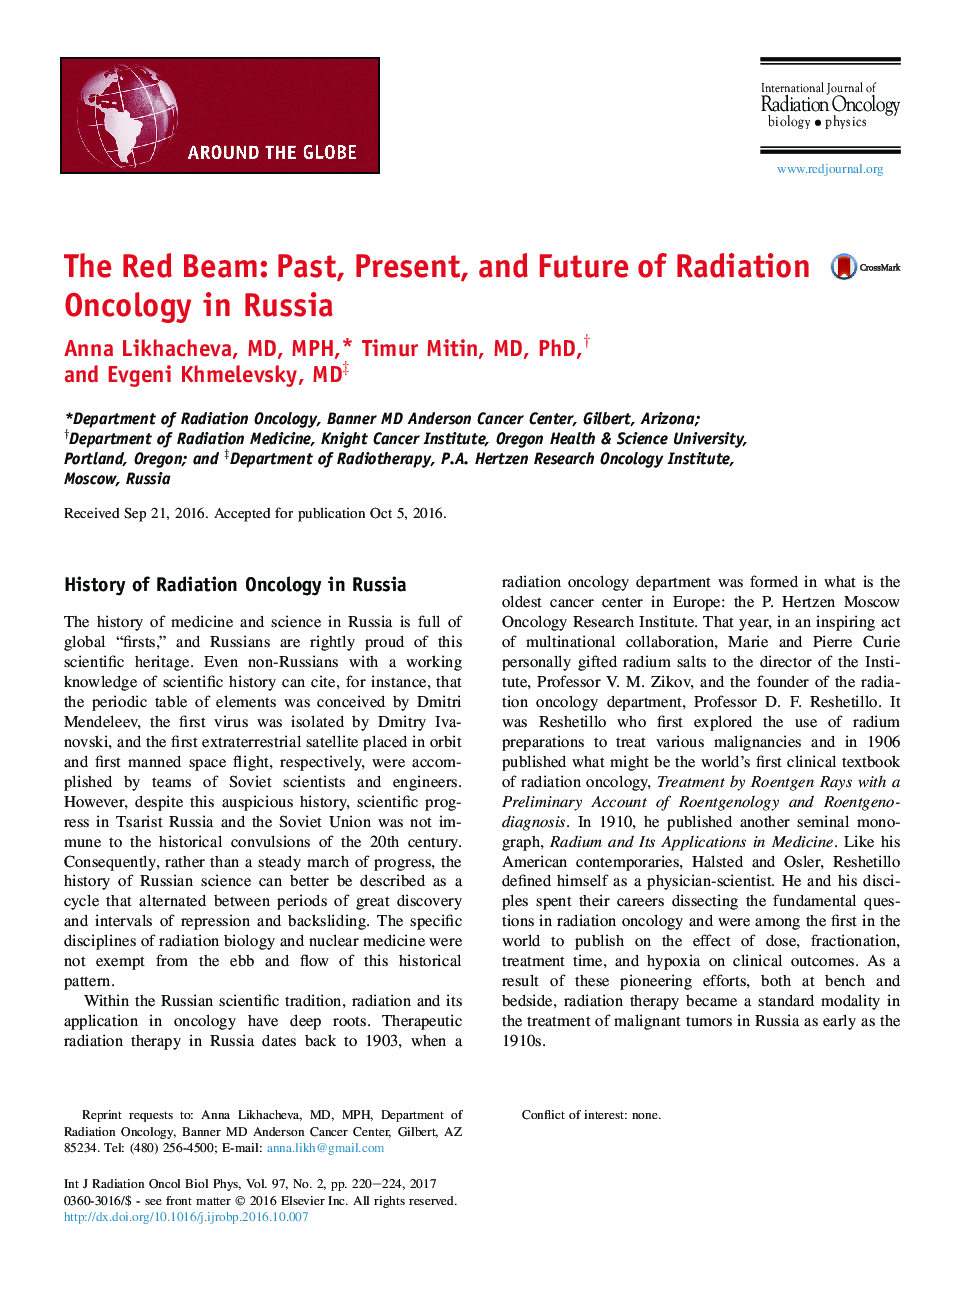 The Red Beam: Past, Present, and Future of Radiation Oncology in Russia